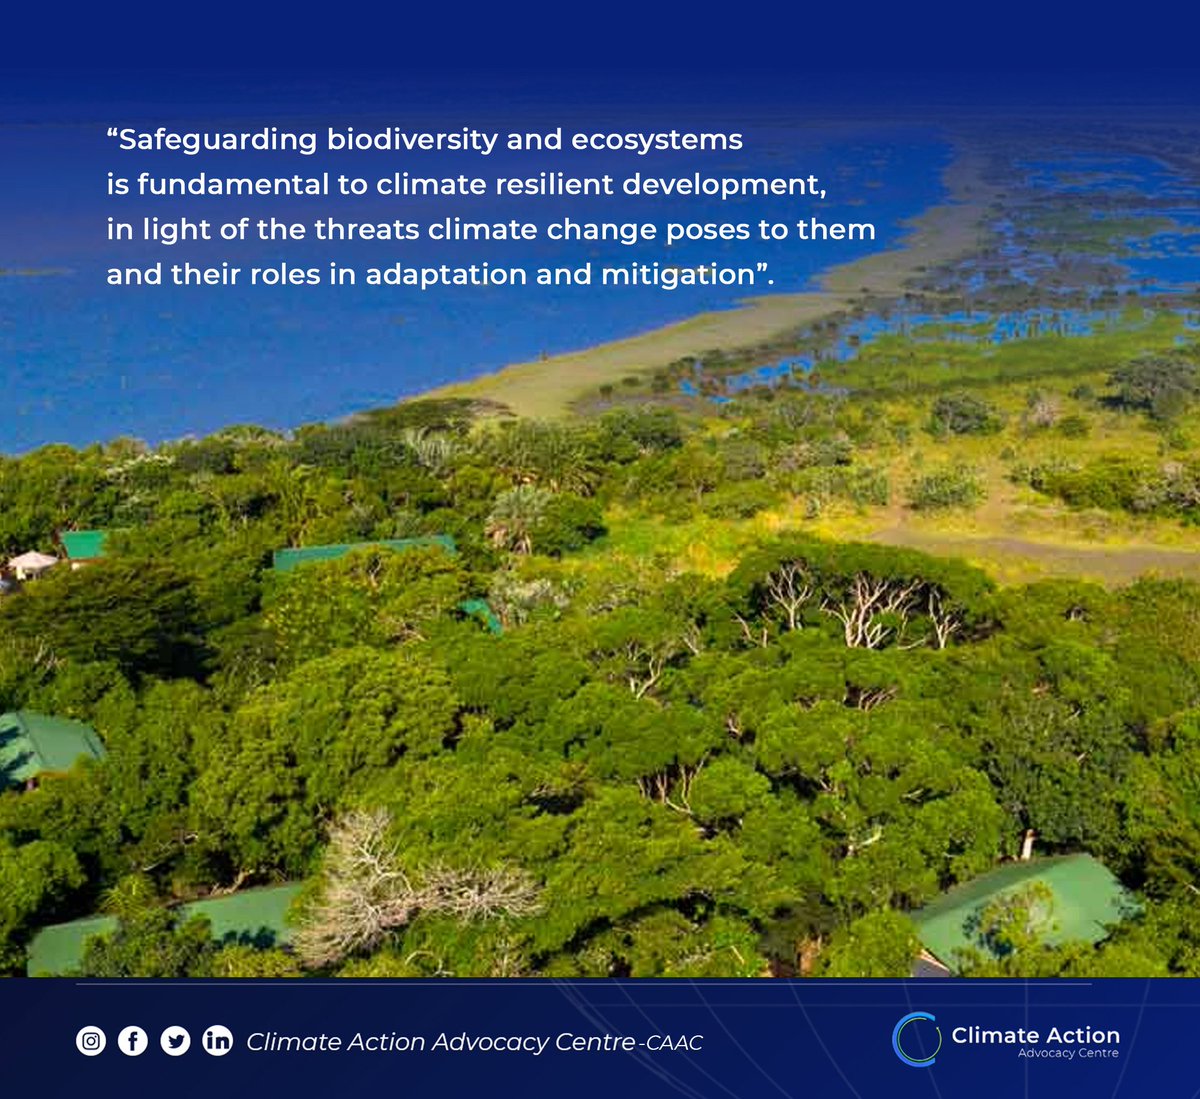 There is a need for the protection of our ecosystems therefore we as individuals must work together to safeguard our environment.
#CAAC 
#ecosystemprotection 
#Climatechangeawareness